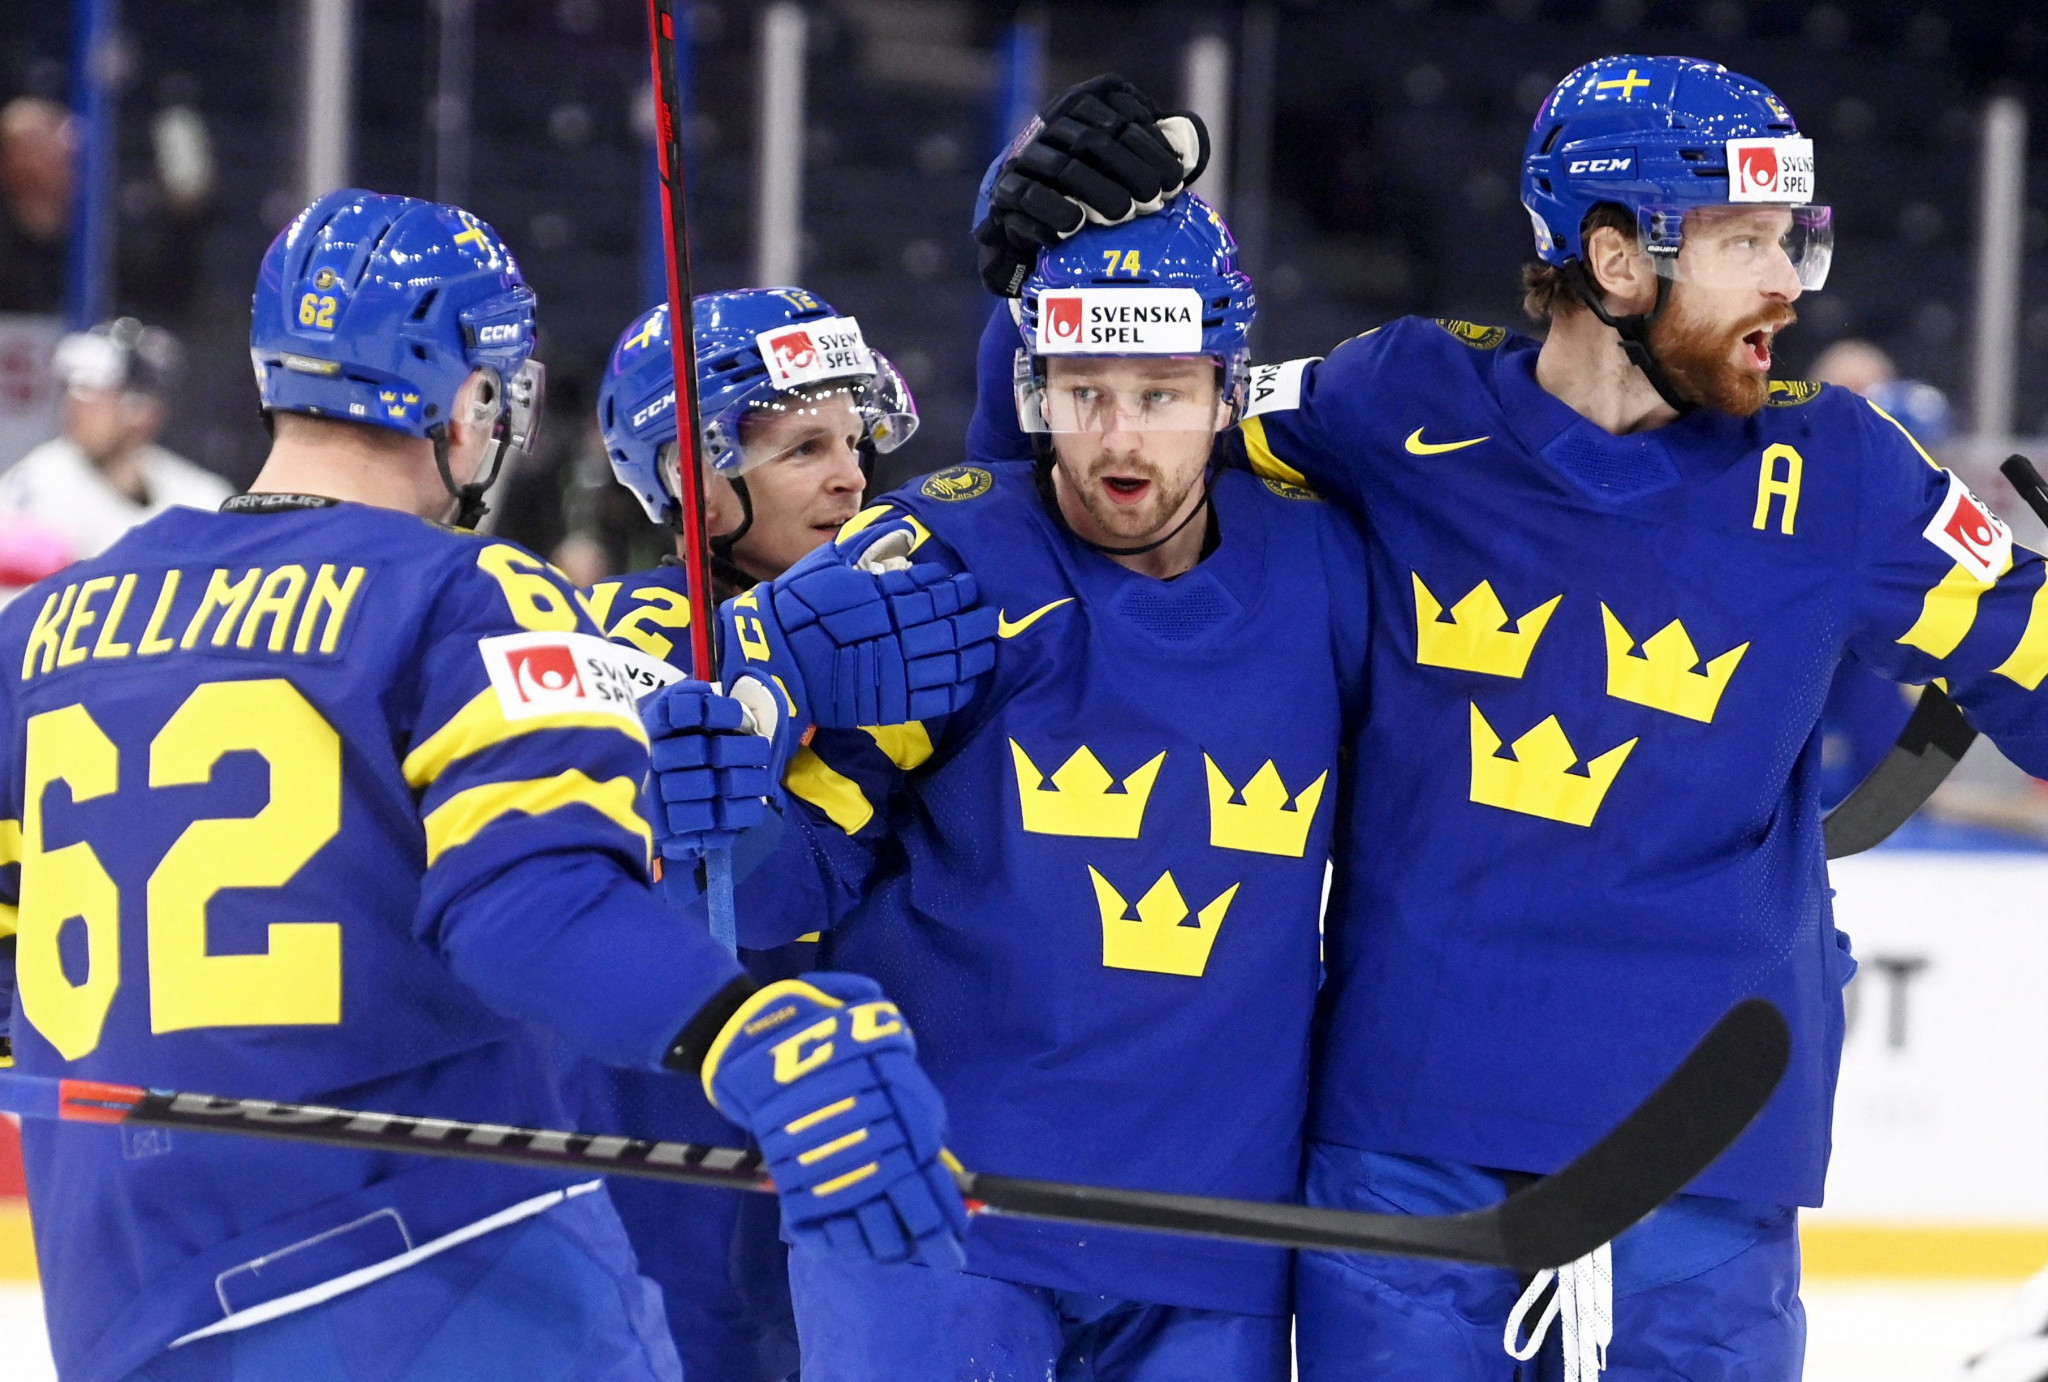 Sweden thrash Britain to maintain pace with Olympic champions Finland at IIHF World Championship